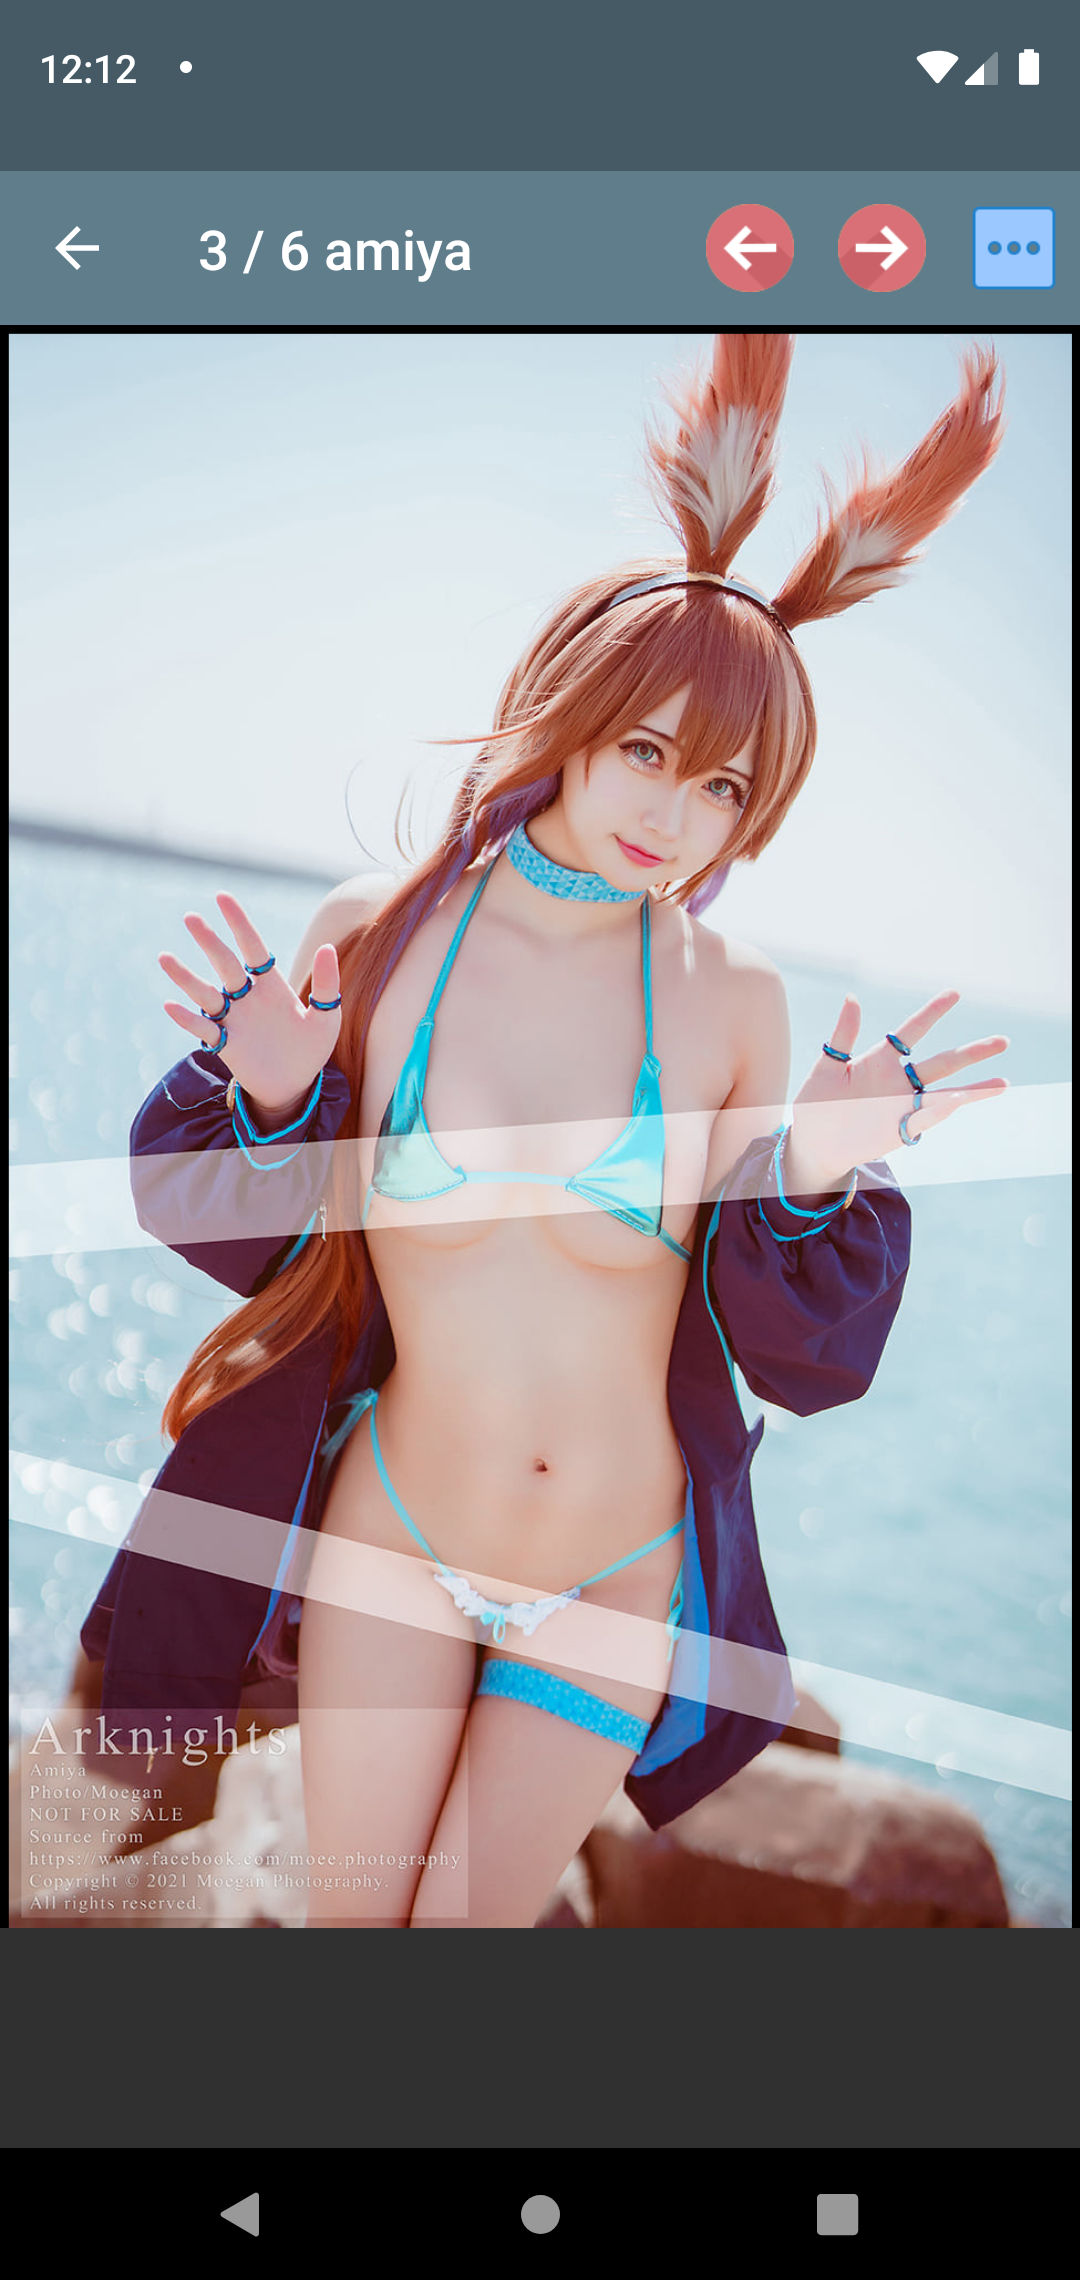 Okita Rinka Pictues cosplay,wallpaper,adams,asian,gag,app,hentai,apps,pictures,sissy,stacy,pic,aplikasi,best,anime,adult,erotic,mobile,apk,with,photos,android,softcore